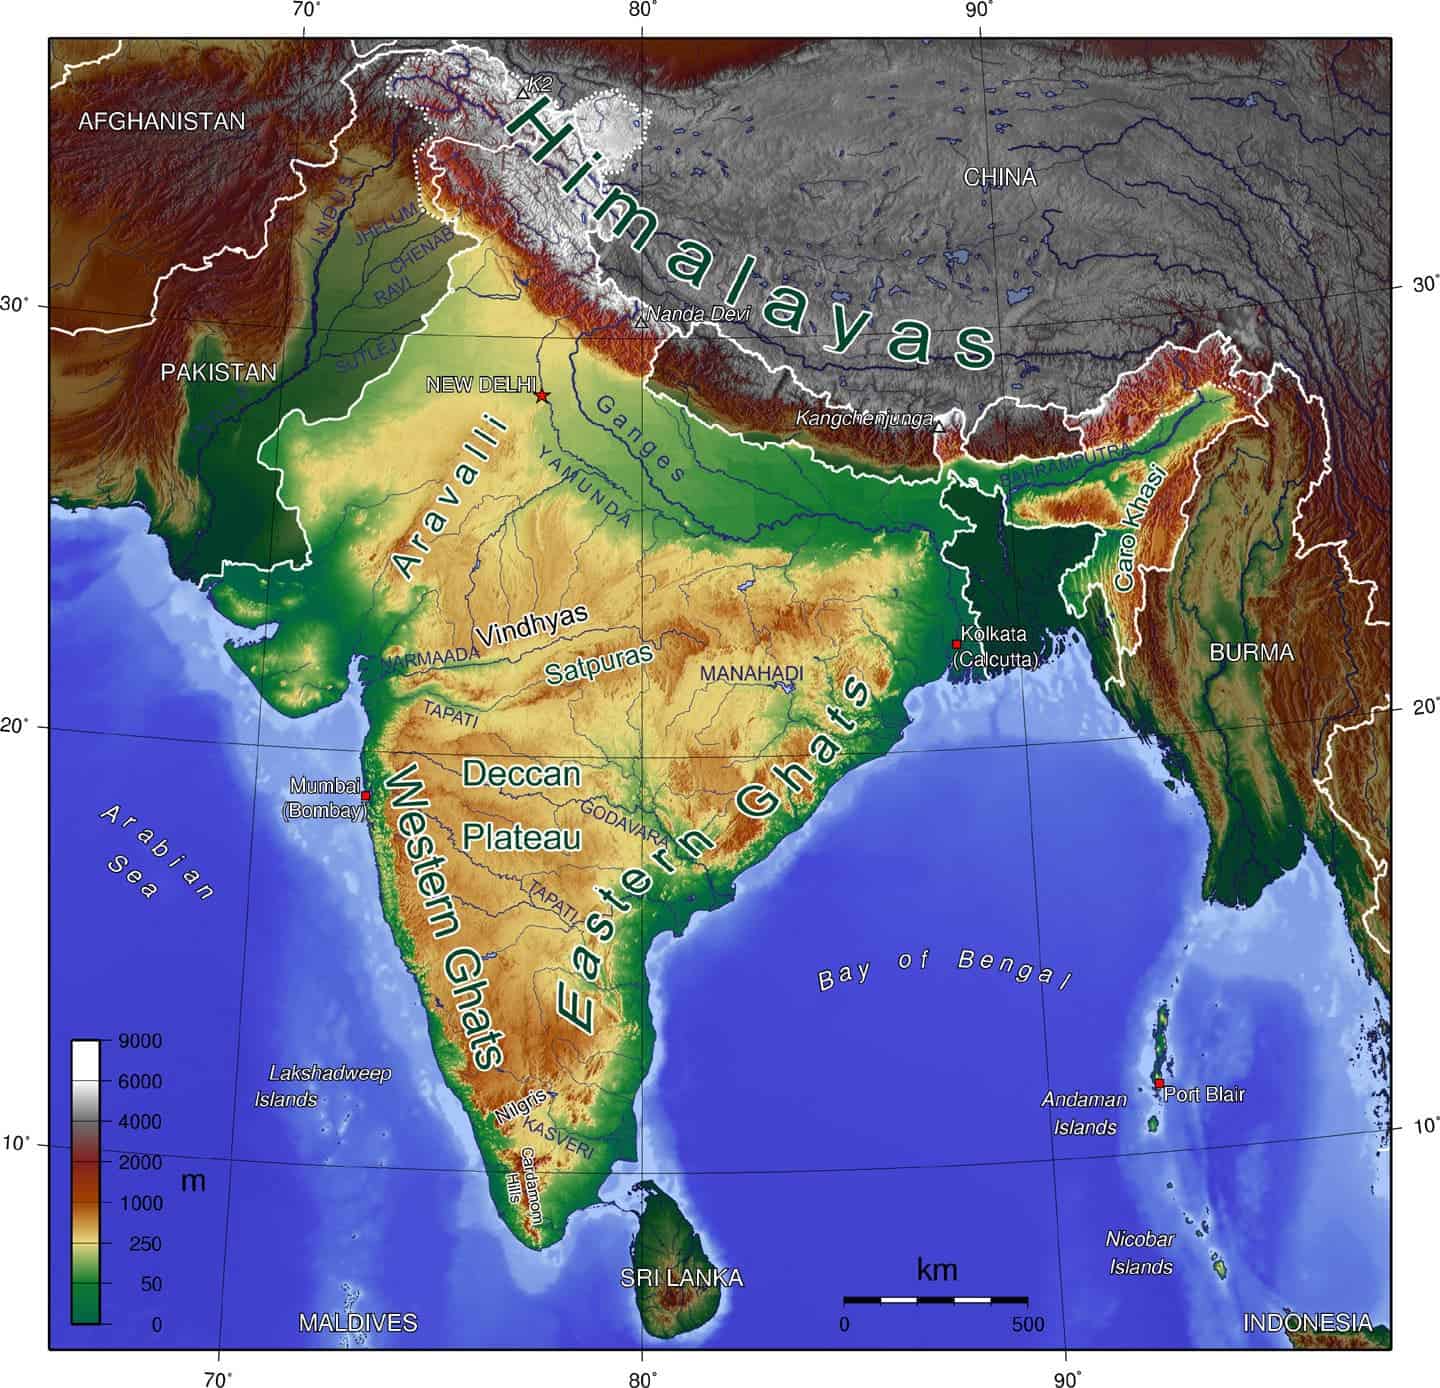 Map showing the mountains of India, created by a tectonic collision. Photo by Sagredo.